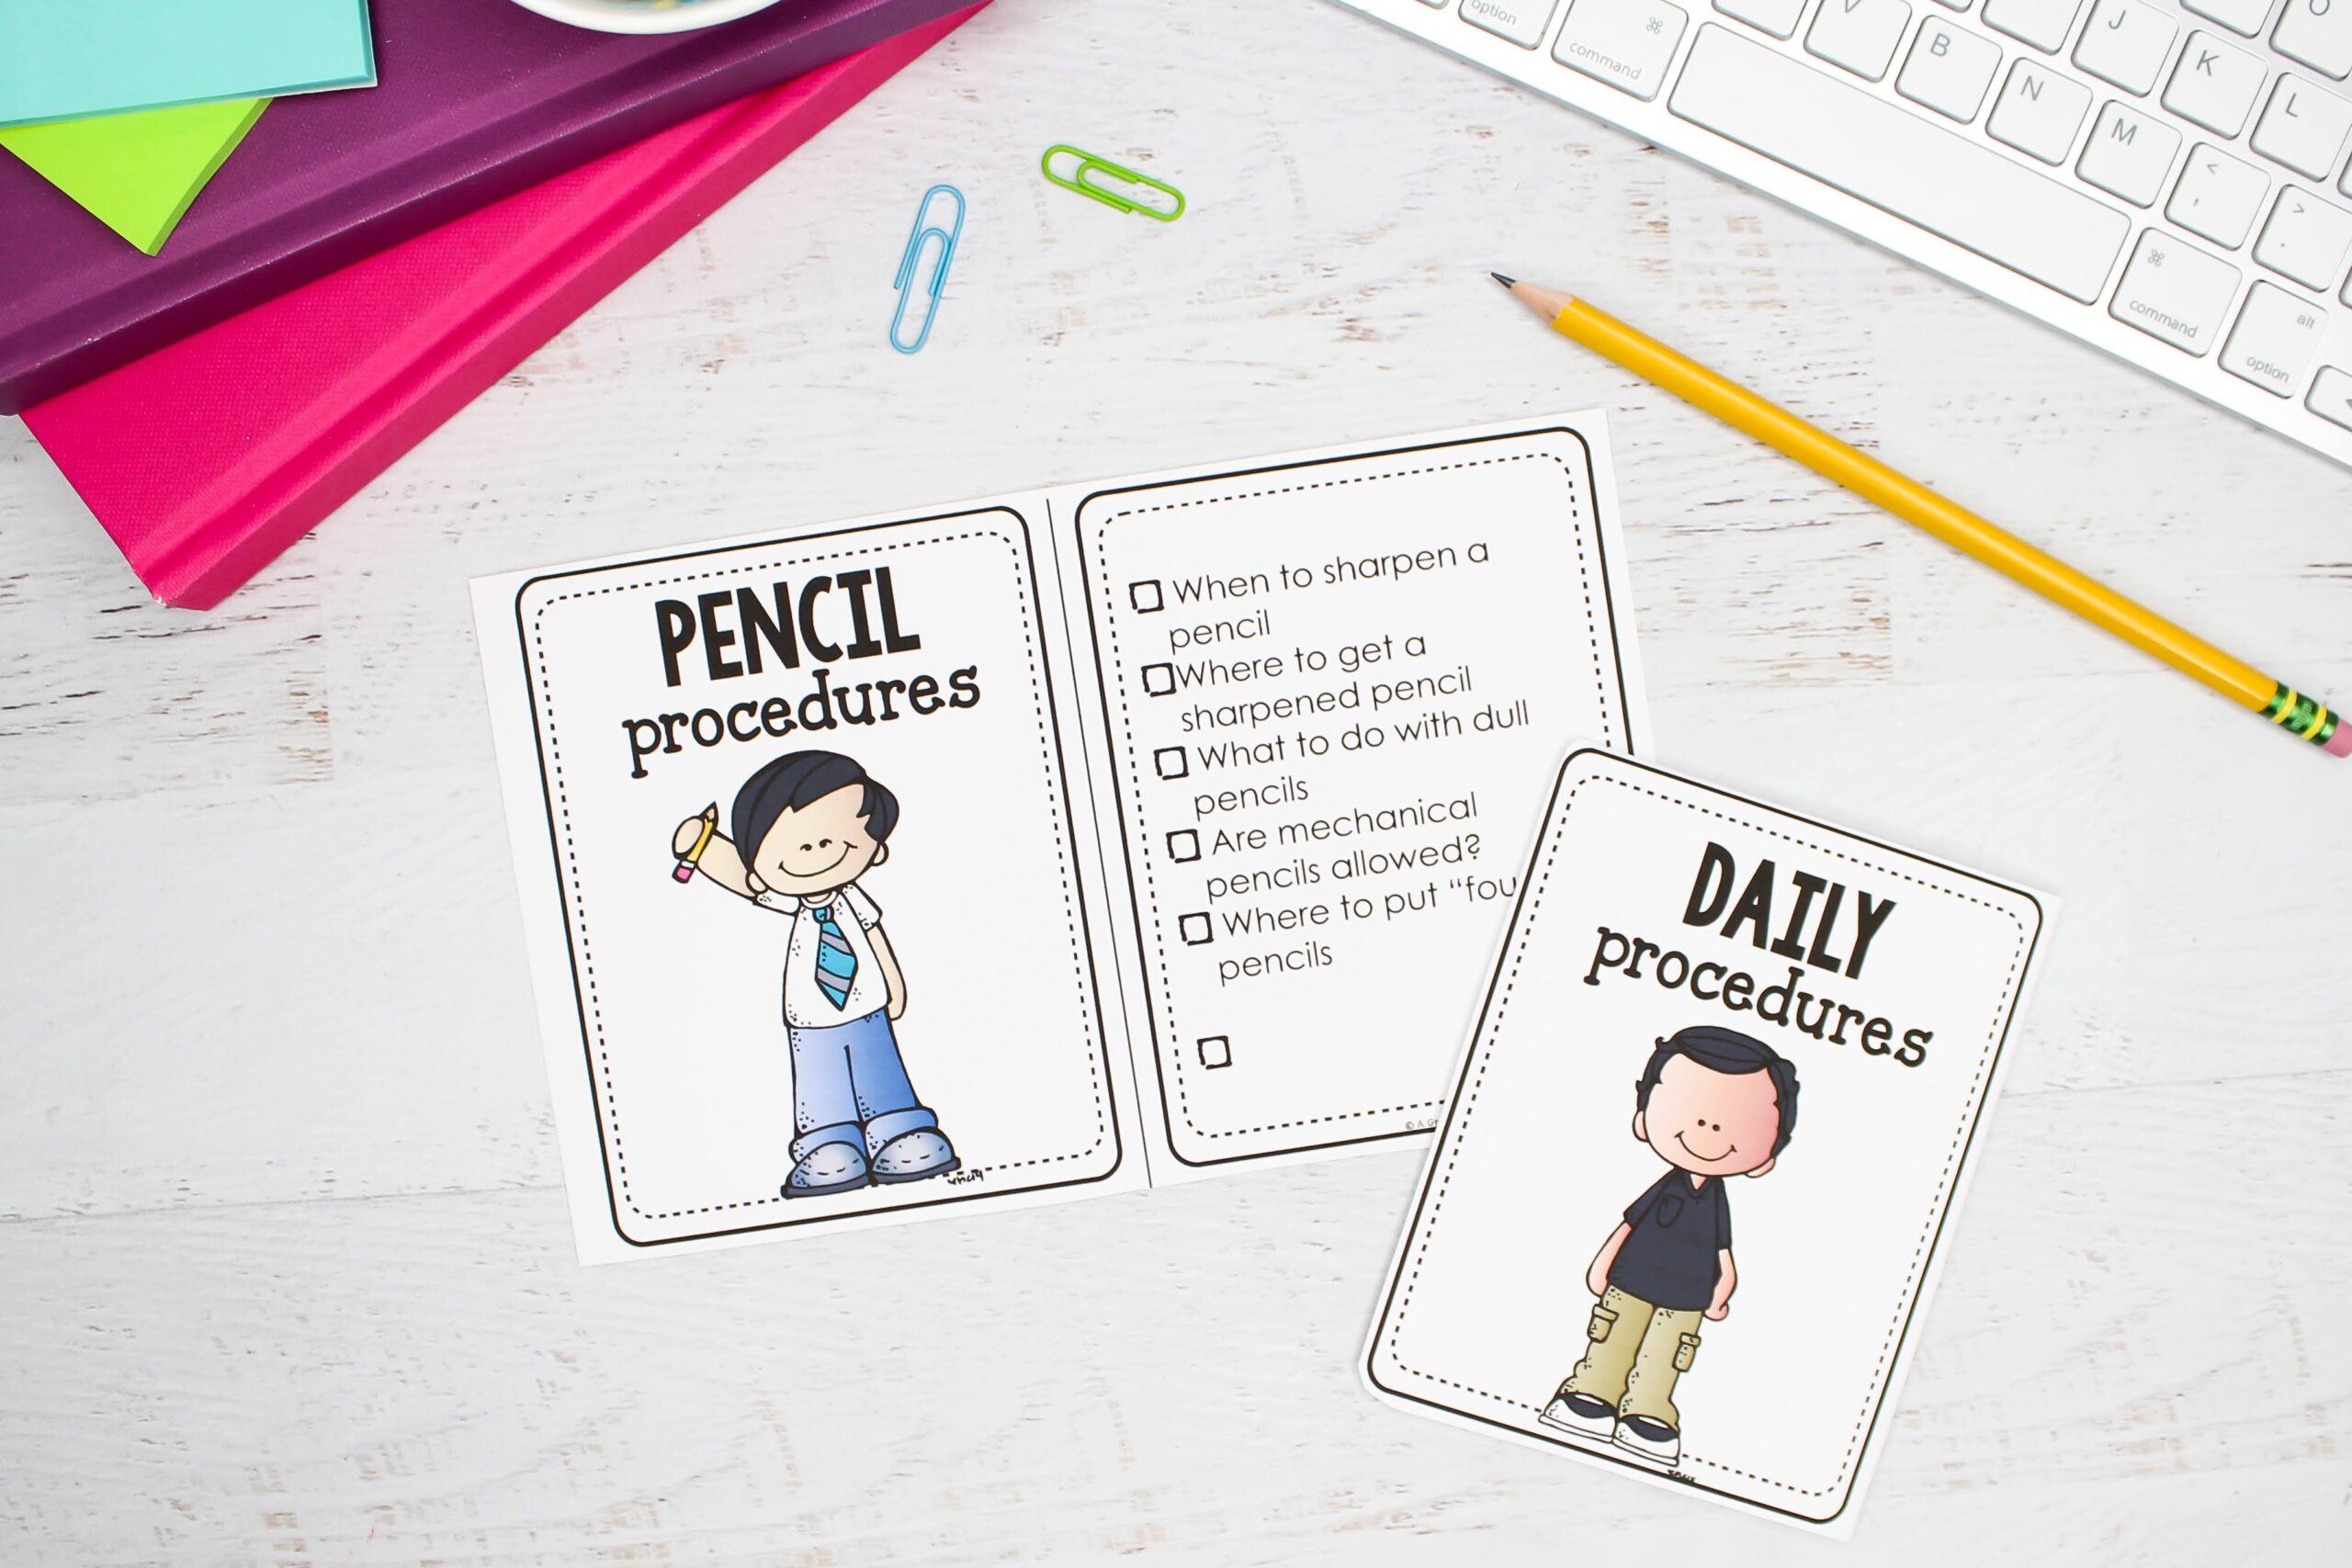 Pencil and daily procedures cards